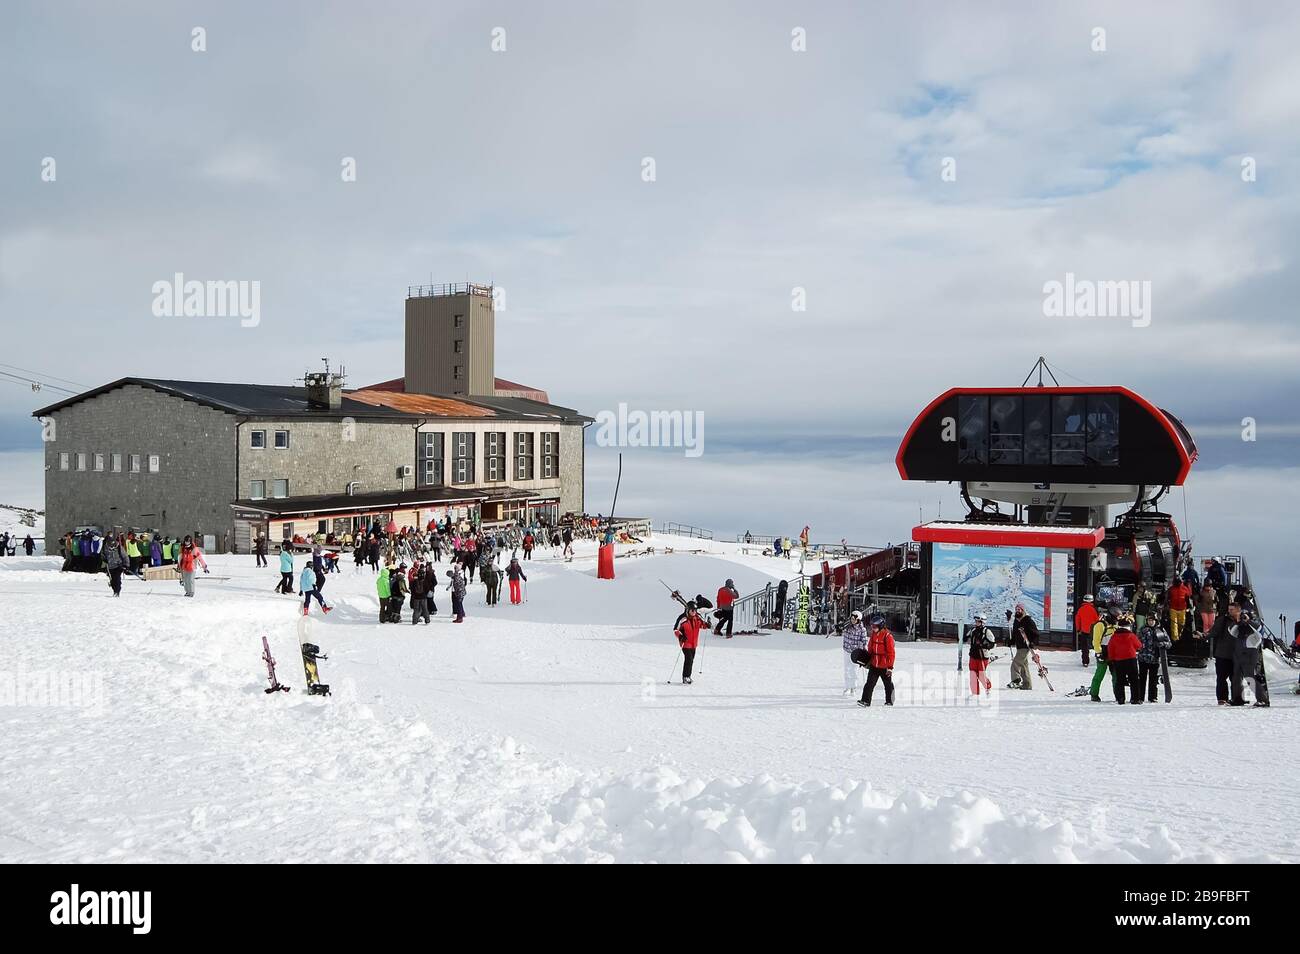 Tatranska Lomnica, Slovakia - January 24, 2018: View from the Skalnate Pleso cable car station in the resort Tatranska Lomnica, High Tatras, Slovakia. Stock Photo